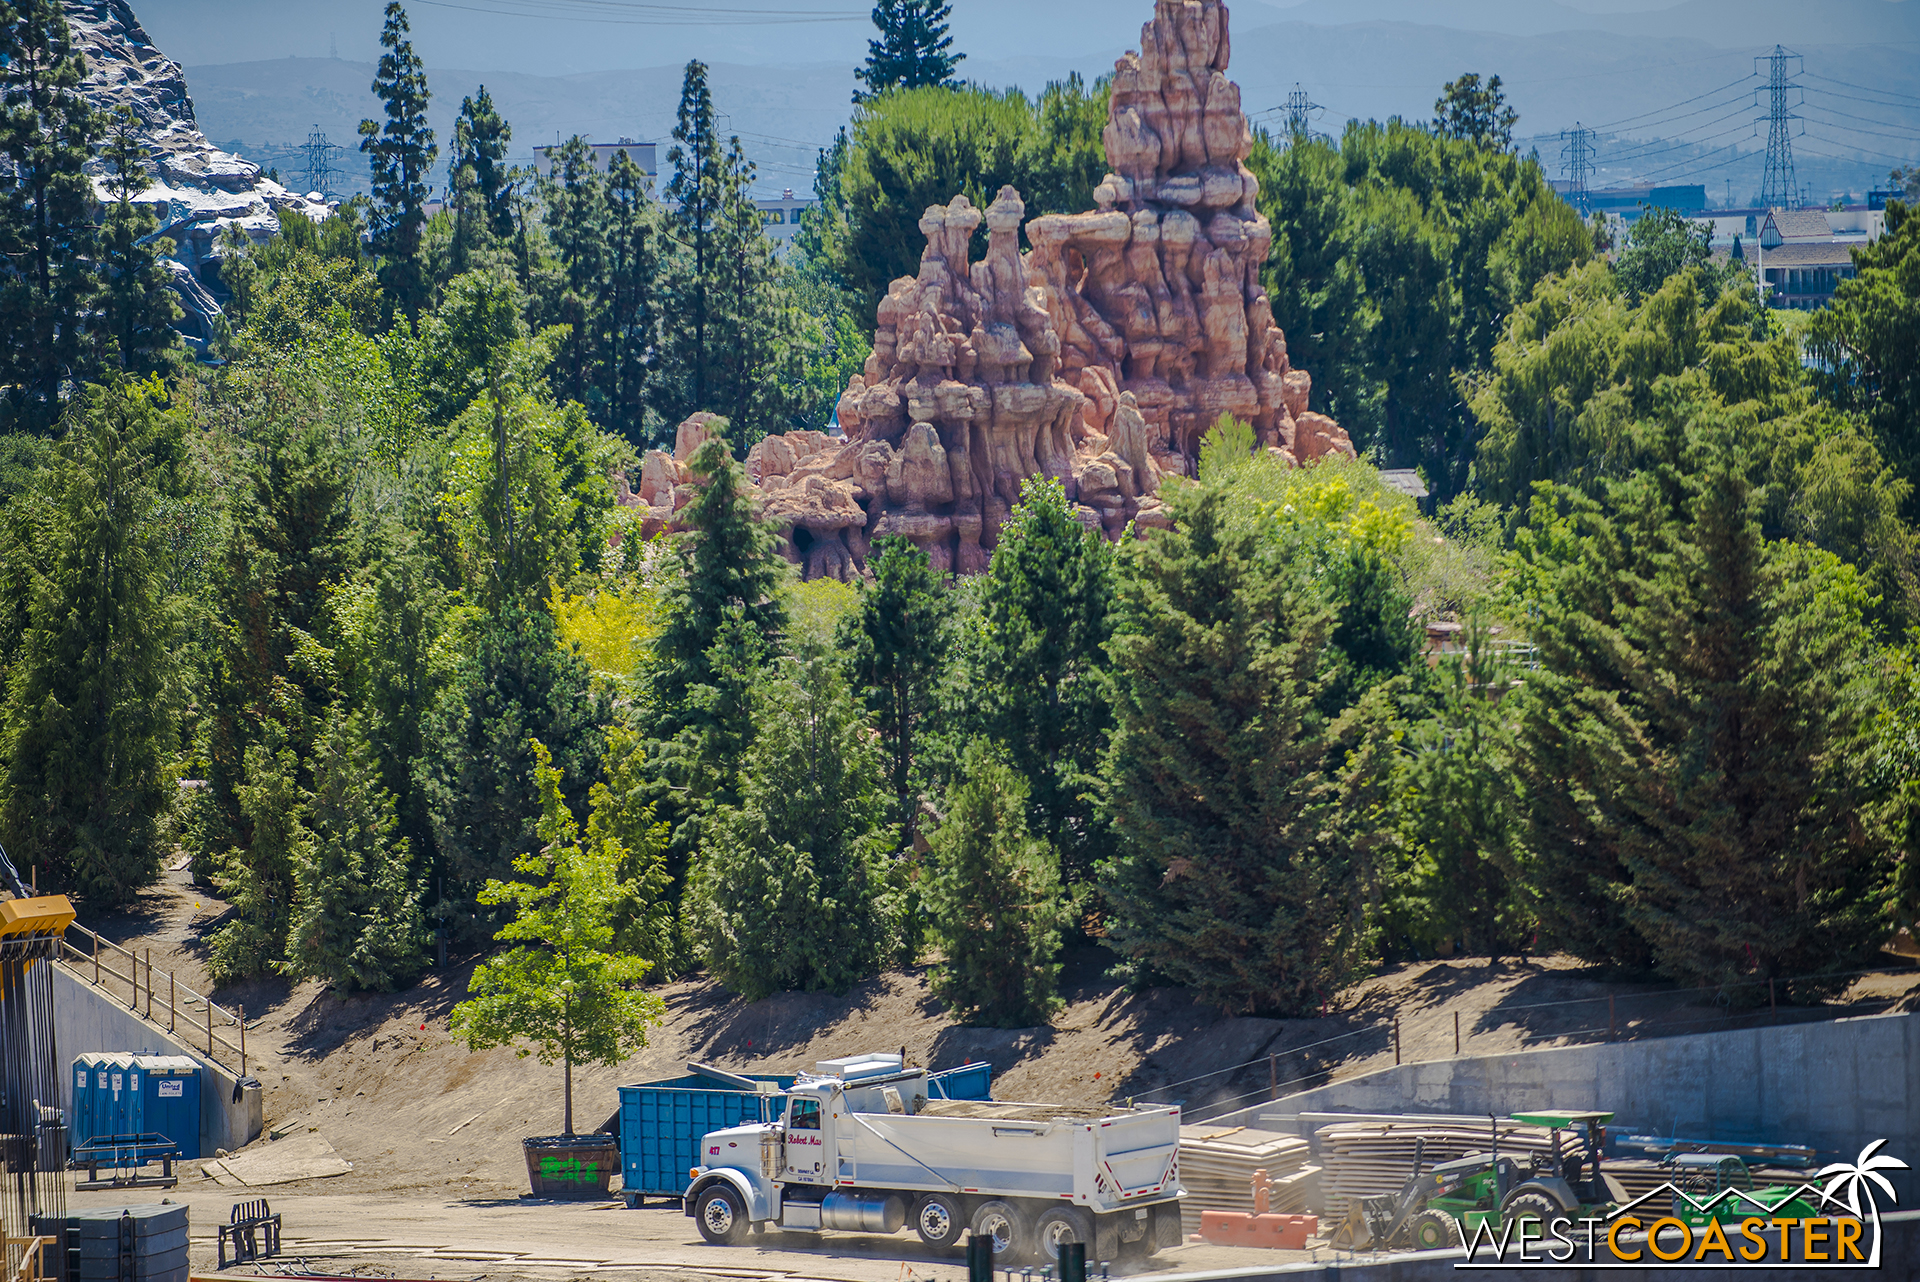  That nice, leafy berm will form an effective barrier between Western Frontierland and Sci-Fi "Star Wars" Land. 